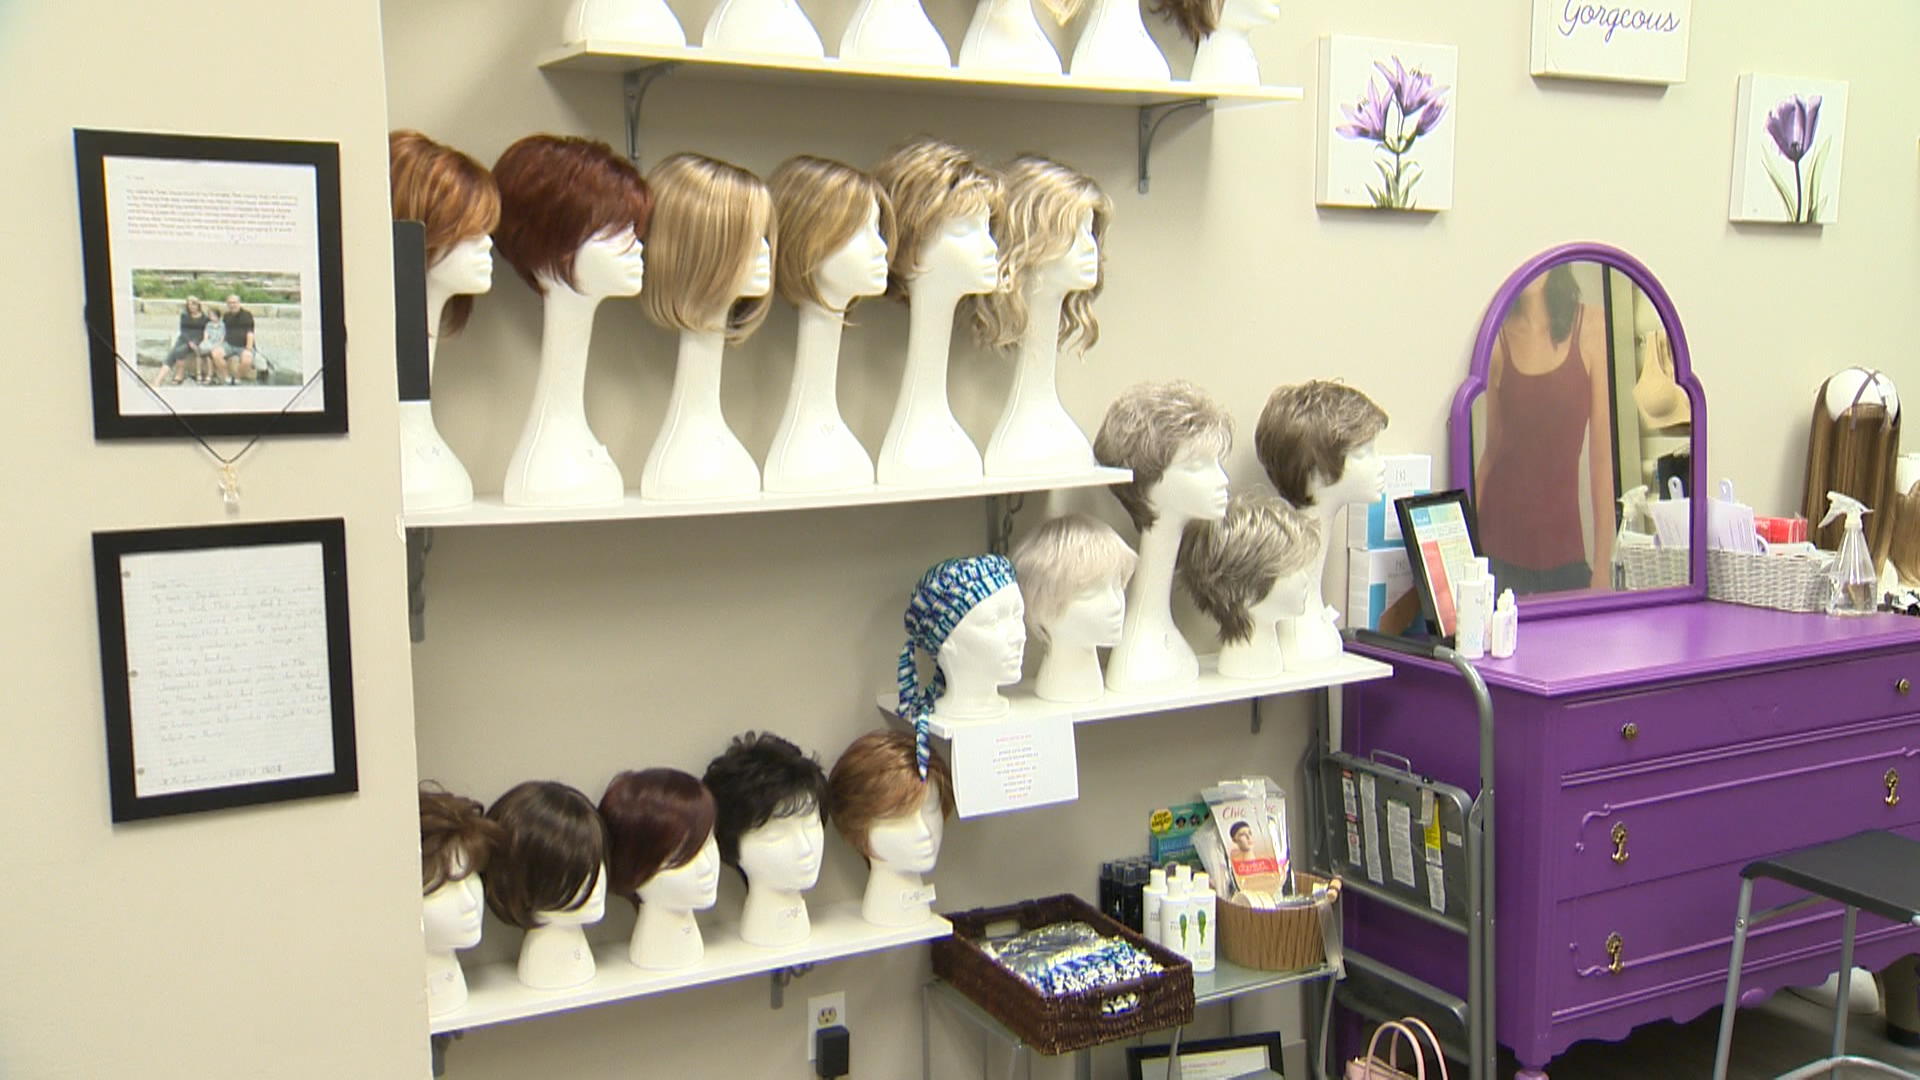 Winnipeg store empowers cancer fighters with hope